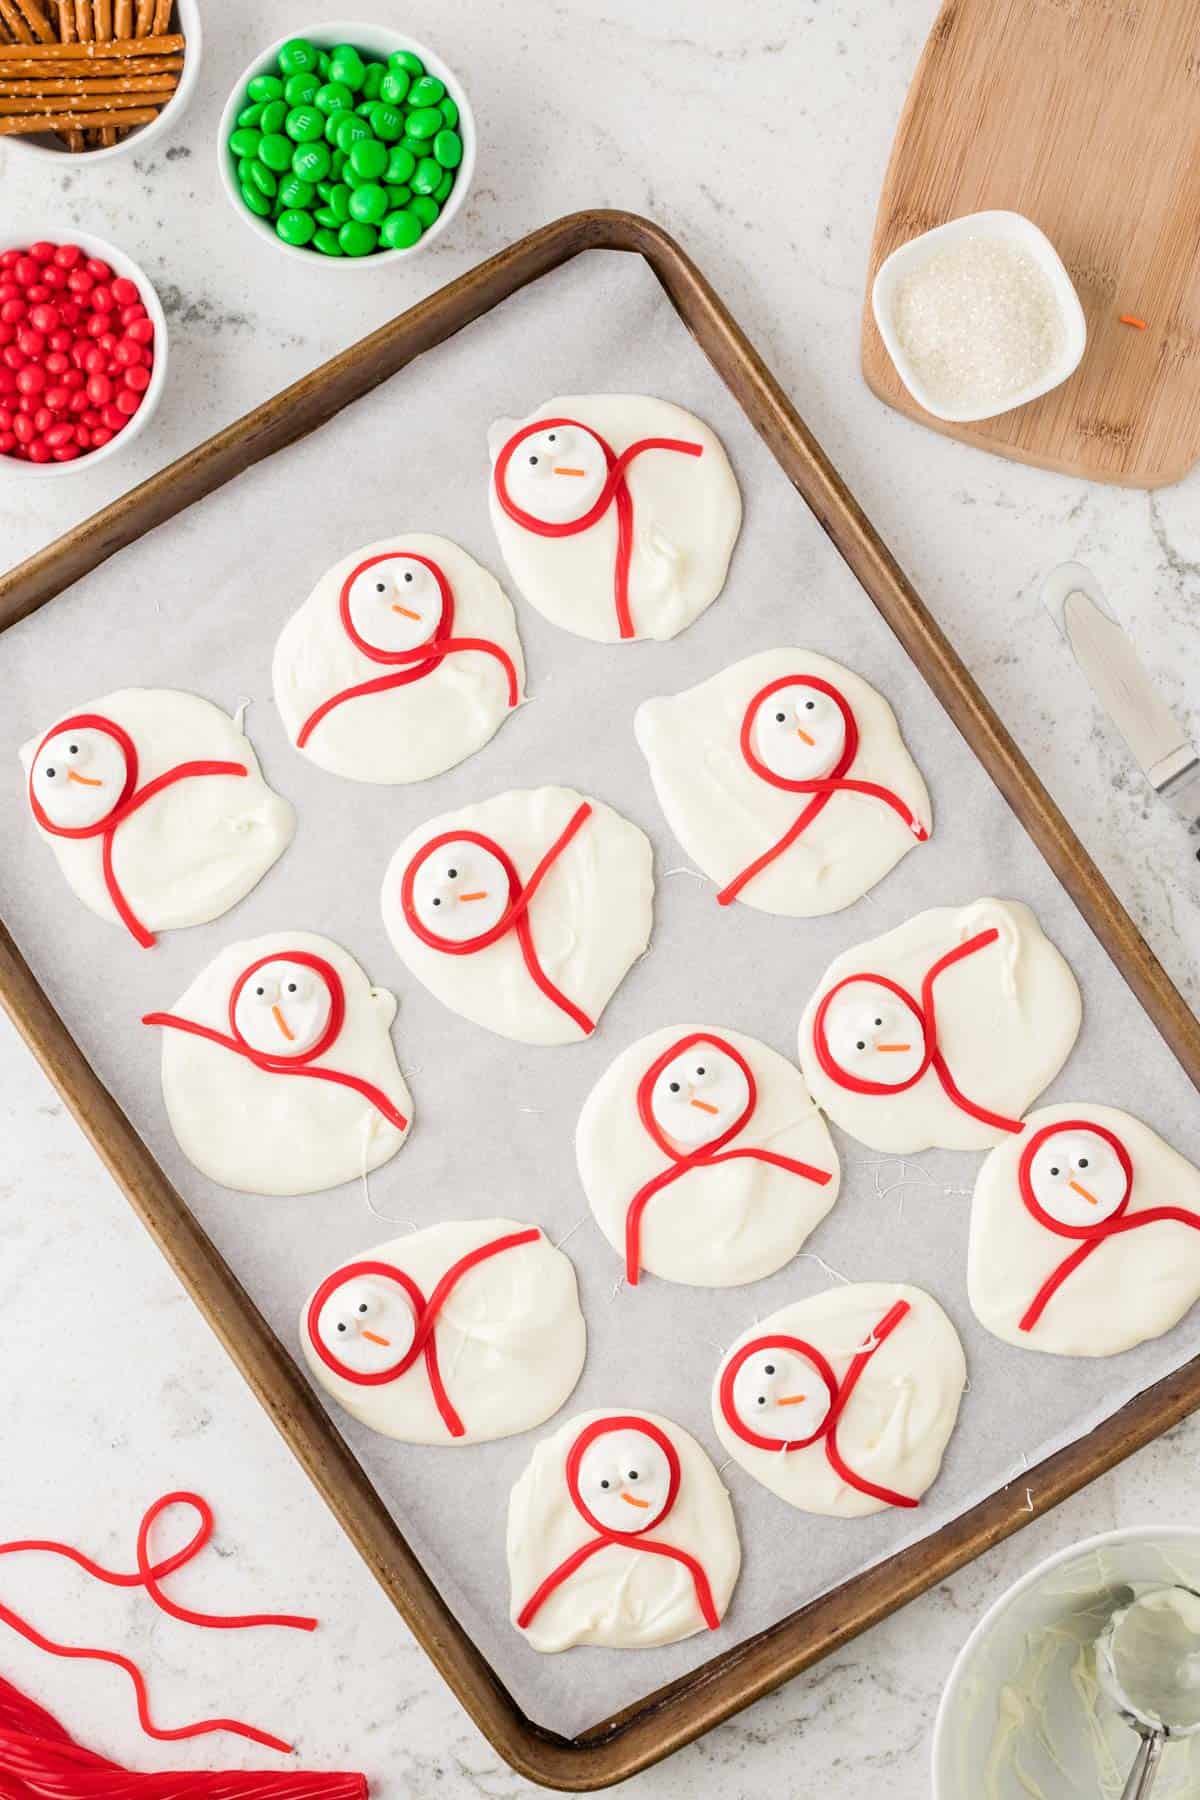 dollops of melted white chocolate arranged in grid on parchment paper with snowman faces